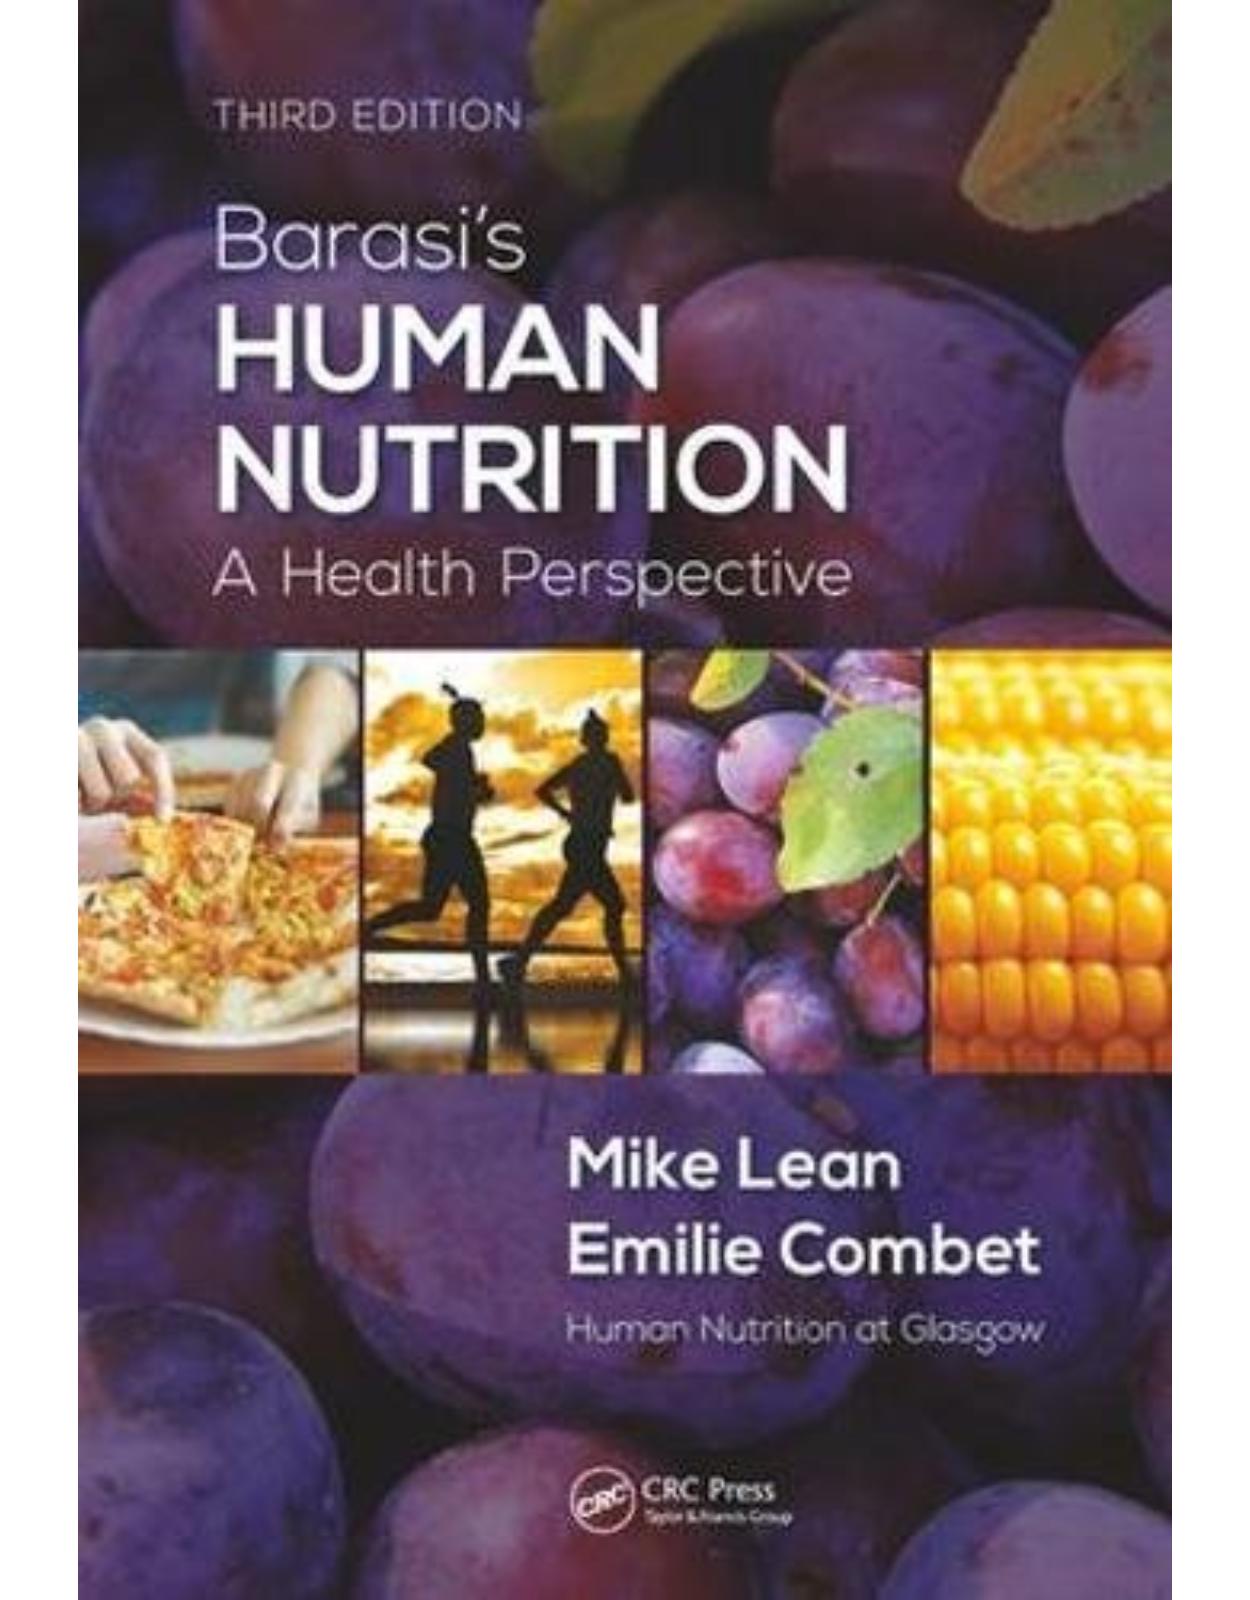 Barasi’s Human Nutrition: A Health Perspective, Third Edition